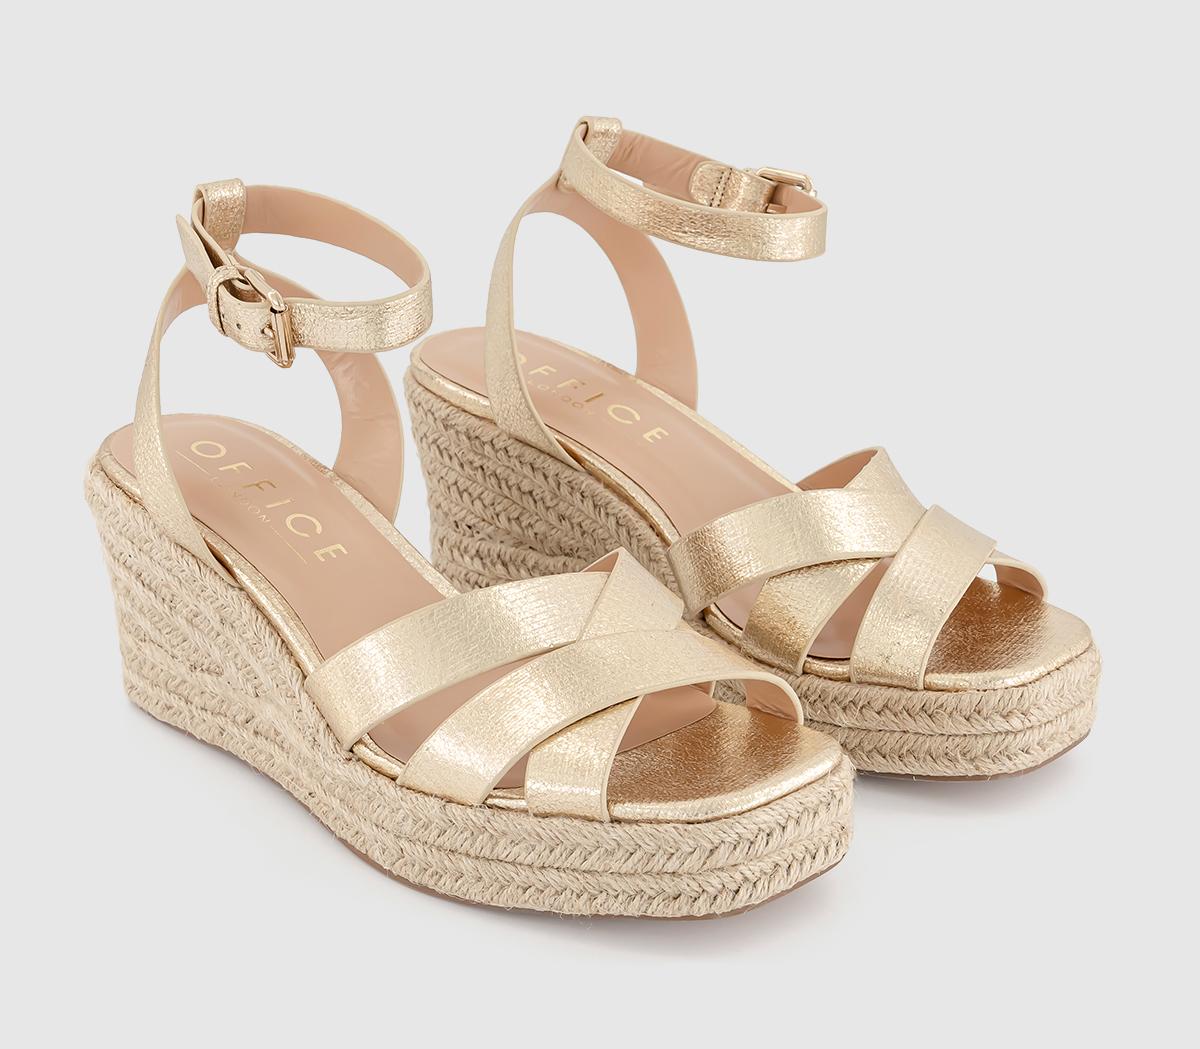 OFFICE Womens Martina Multi Strap Mid Espadrille Wedges Gold, 6